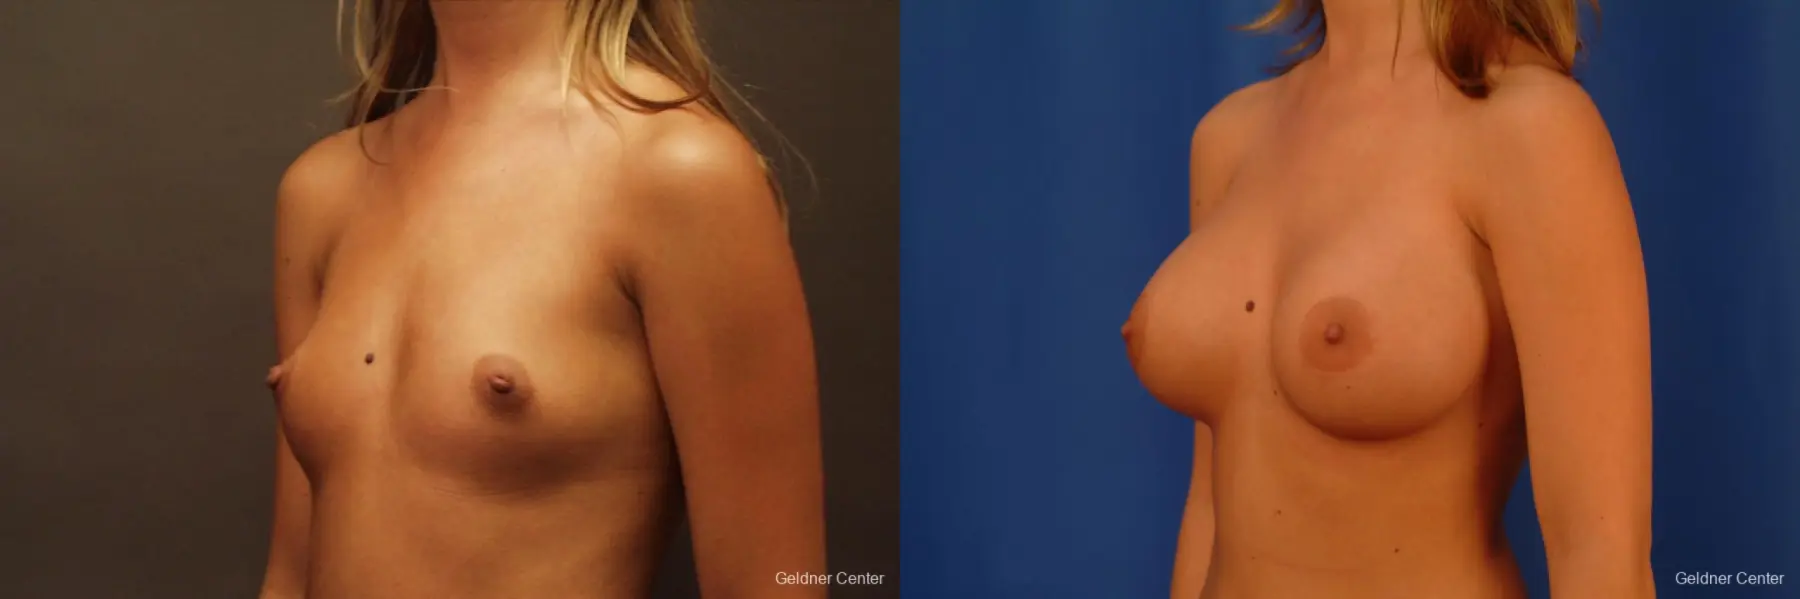 Breast Augmentation Lake Shore Dr, Chicago 2533 - Before and After 4